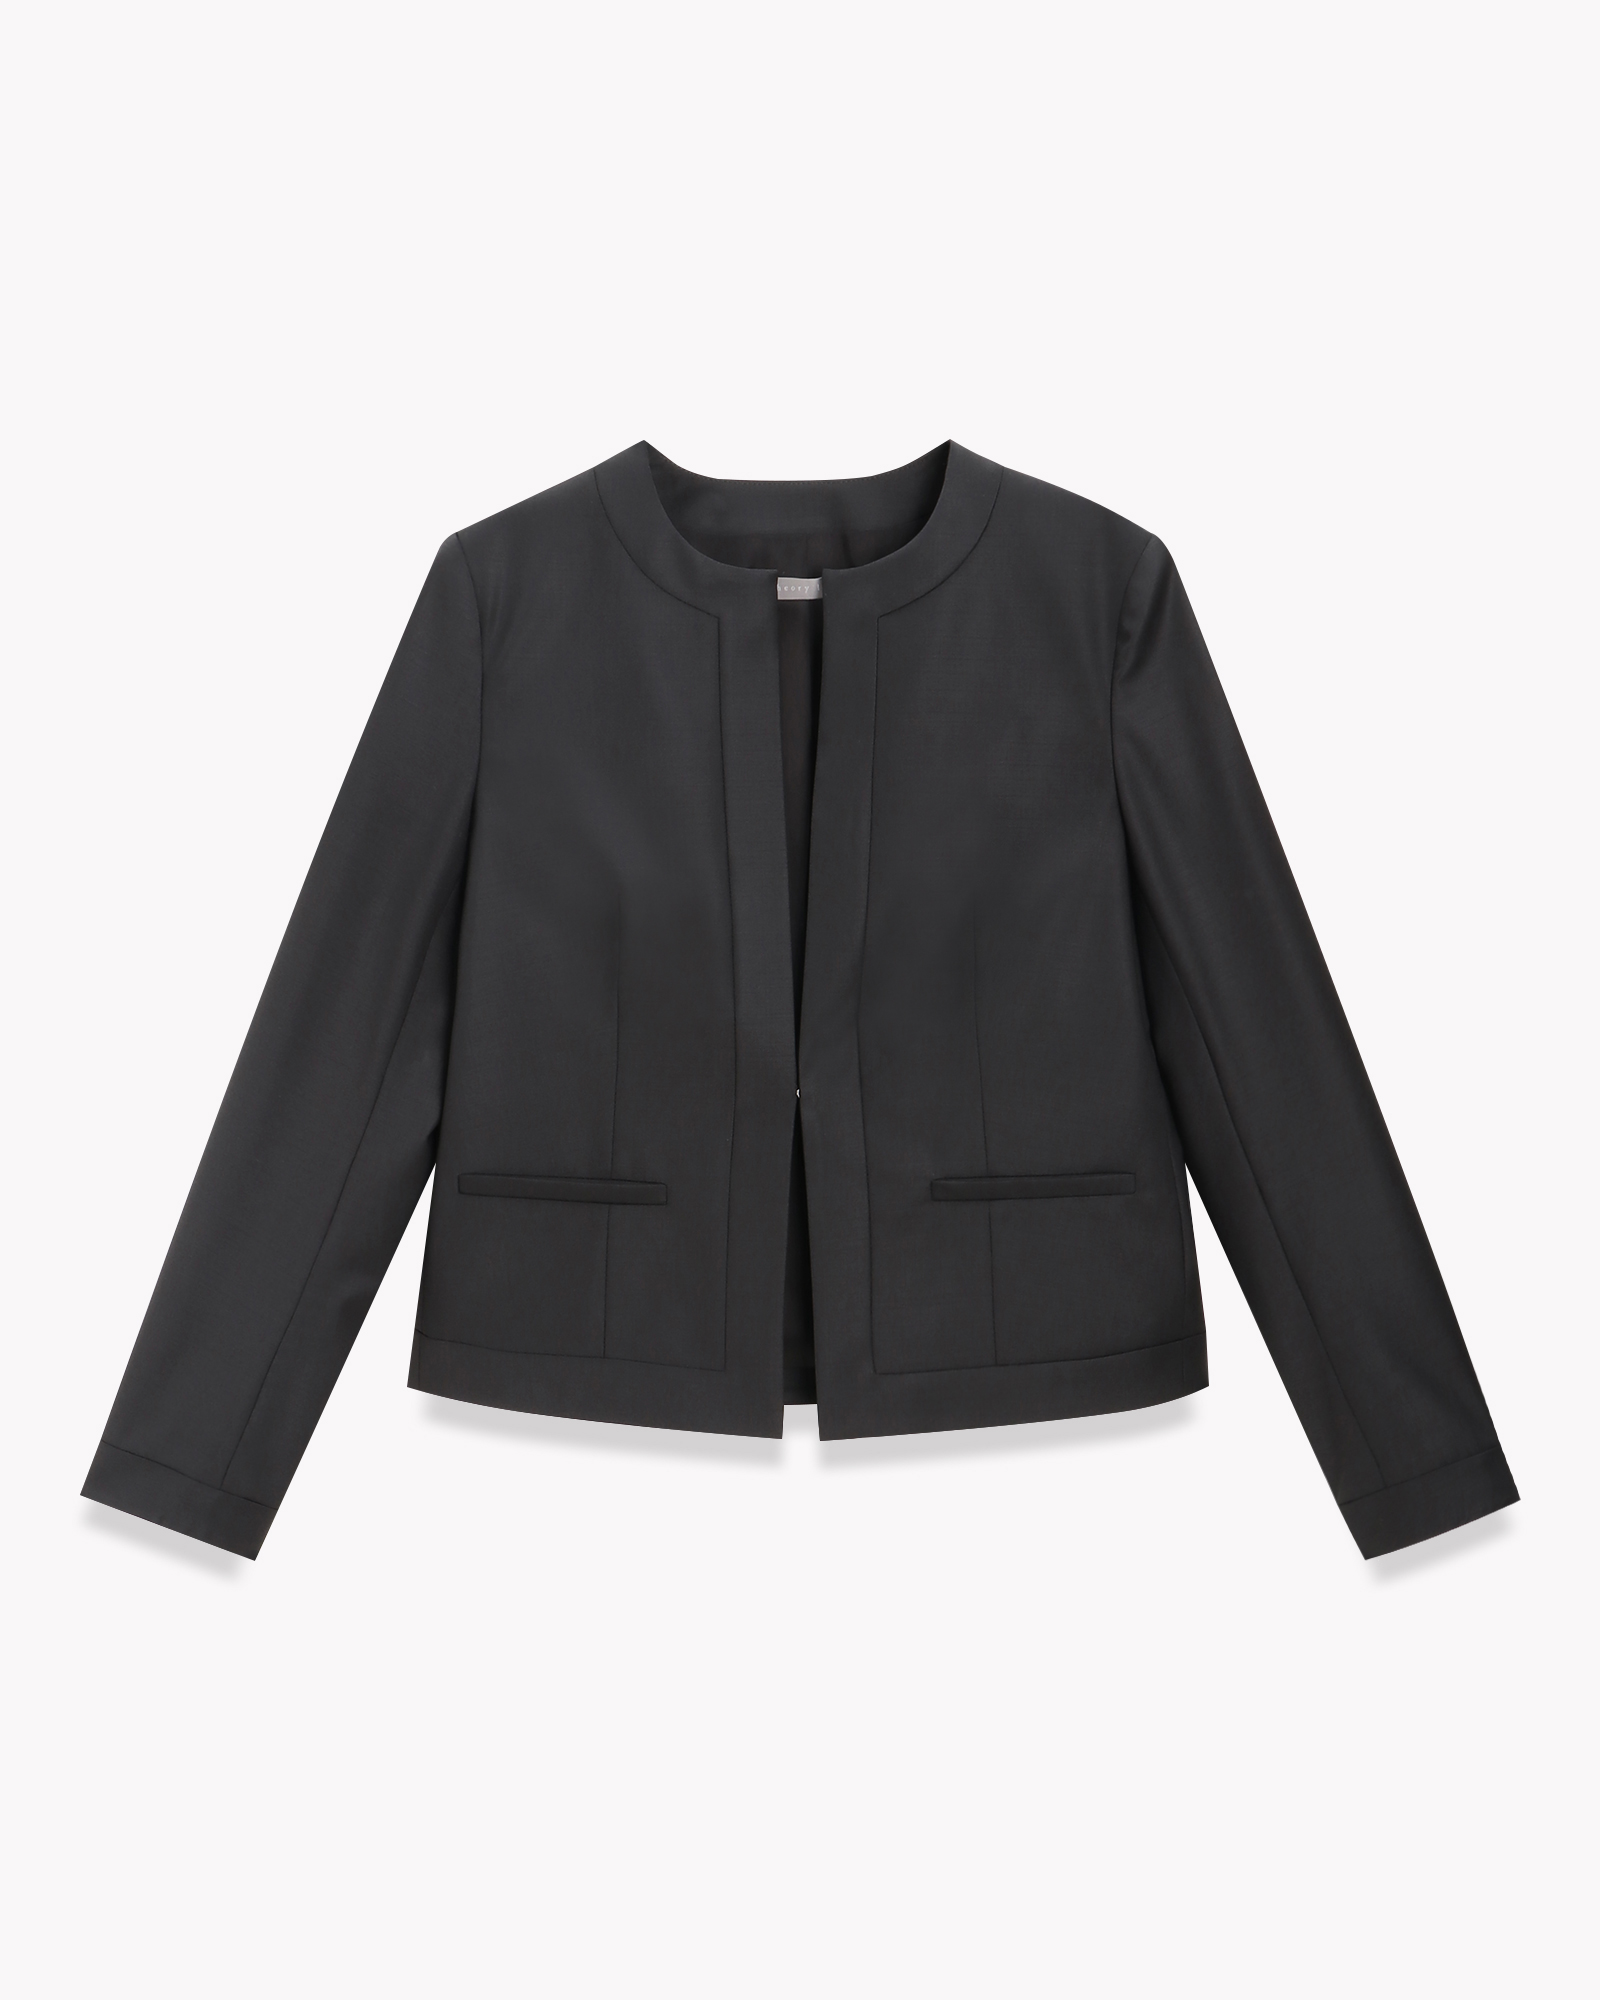 Executive Nikkia N2 | Theory luxe[セオリーリュクス]公式通販サイト